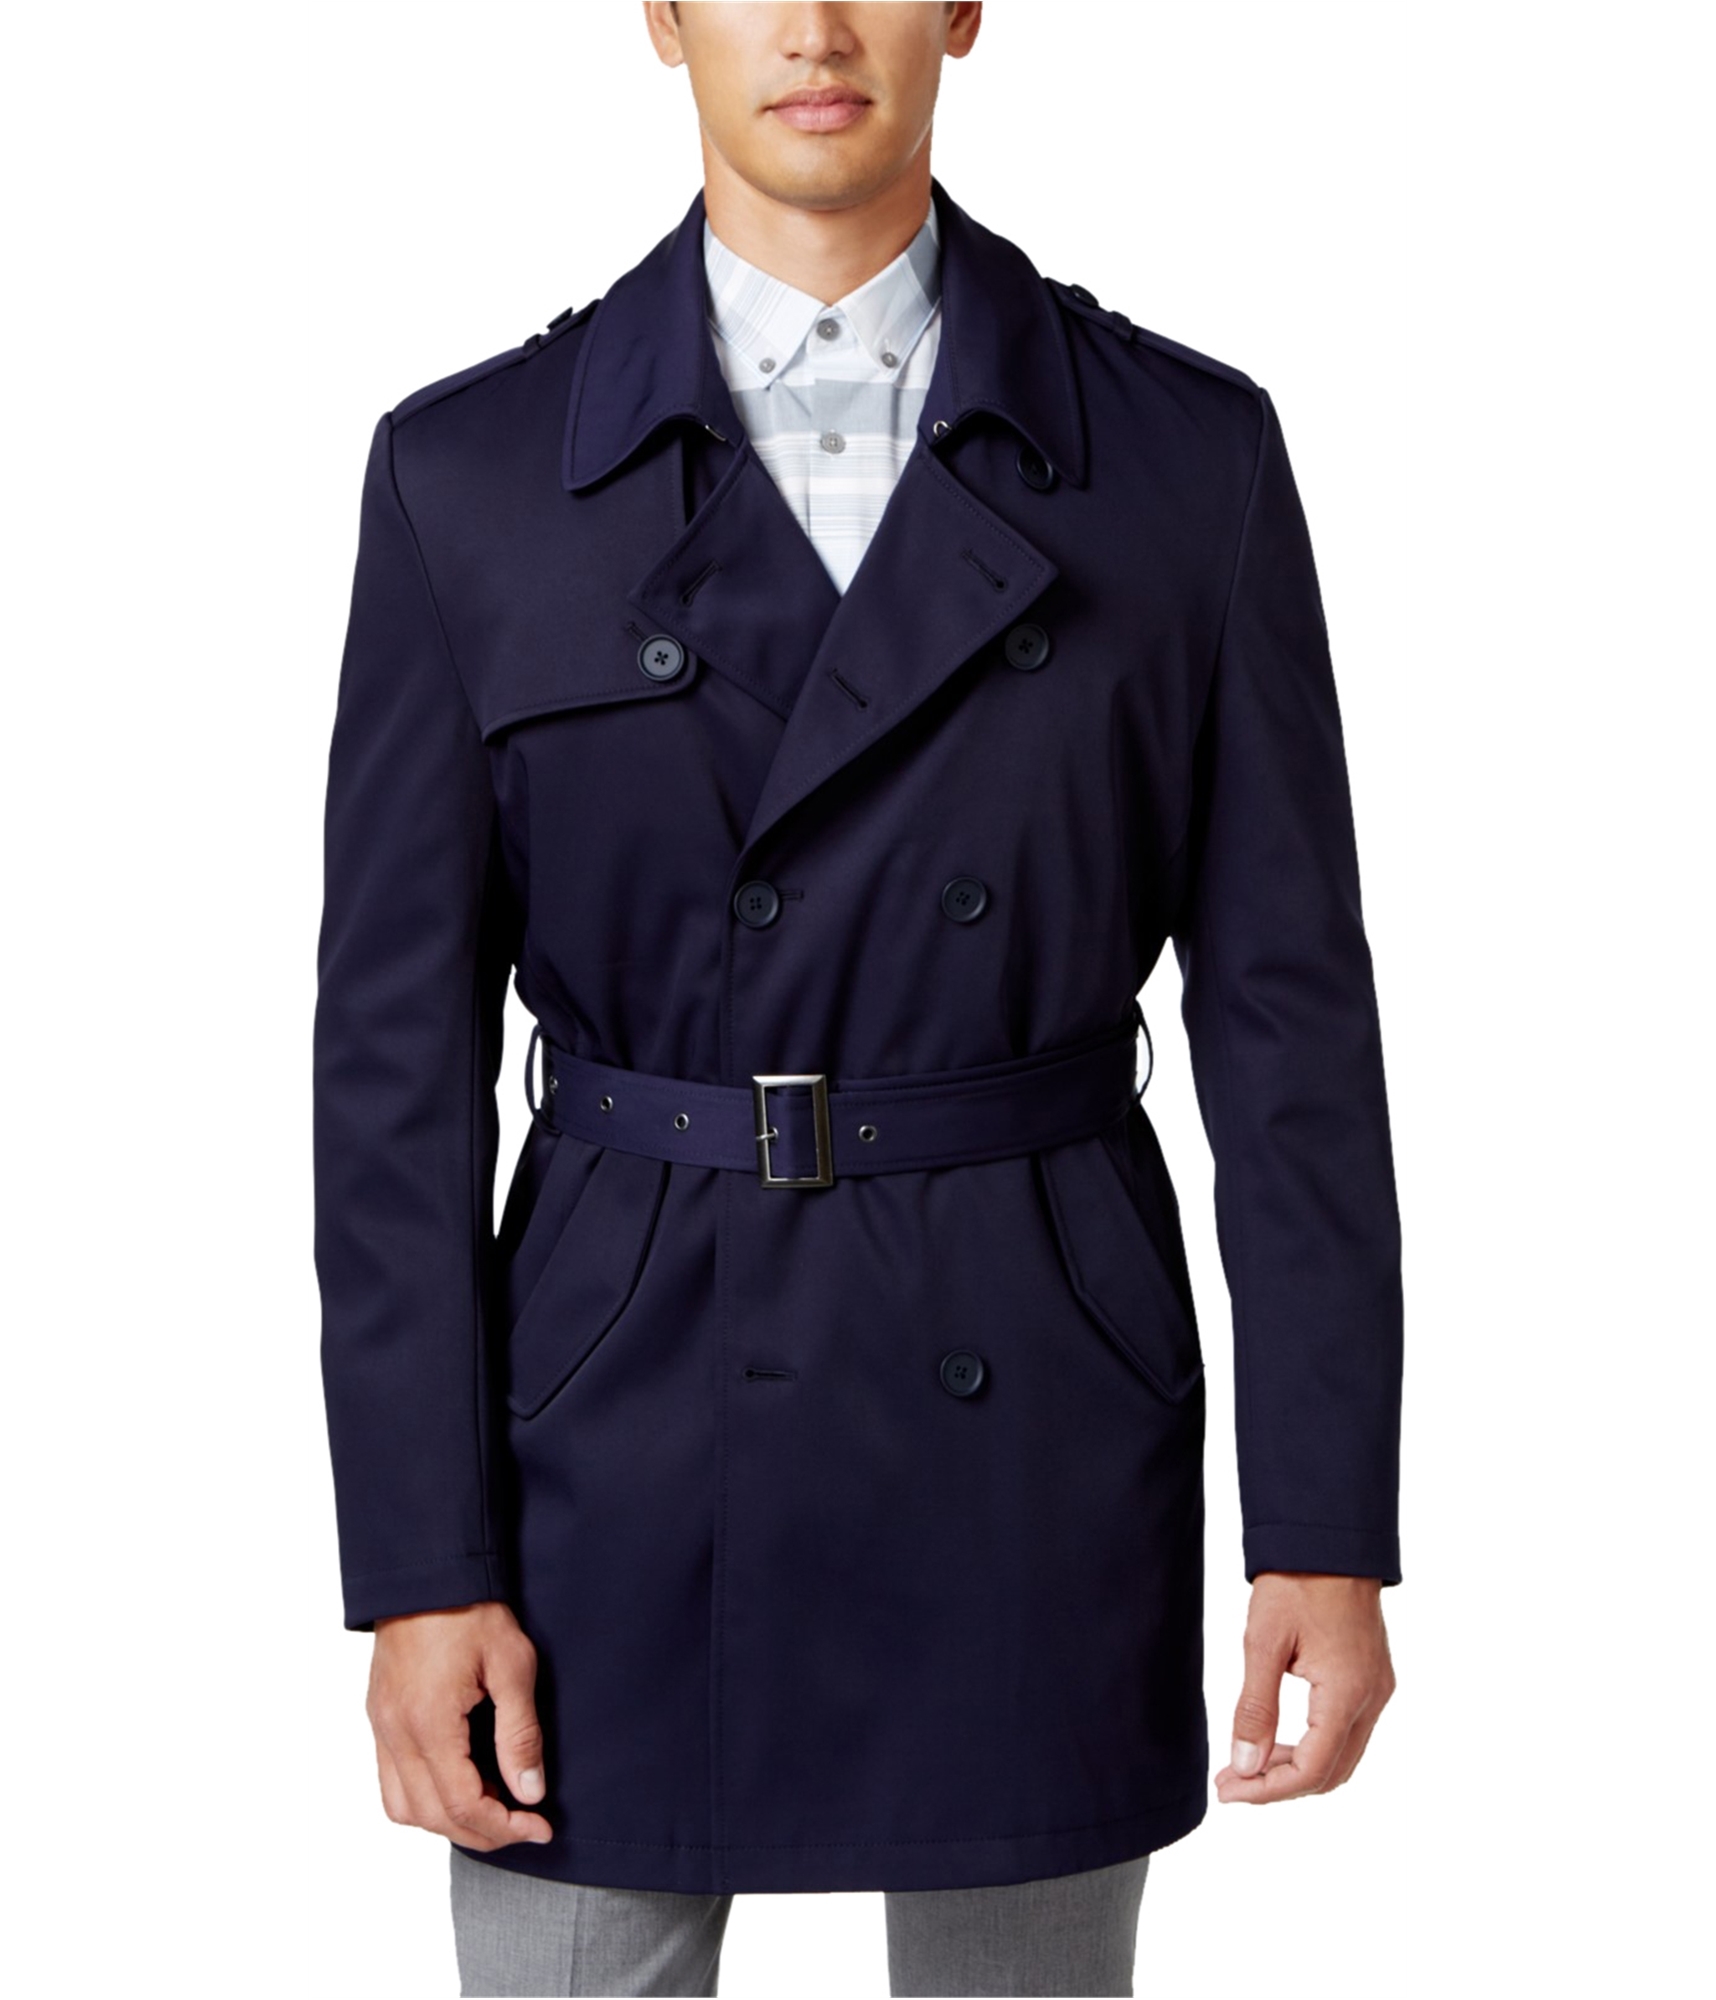 Buy a Calvin Klein Mens Double Breasted Raincoat, TW1 | Tagsweekly